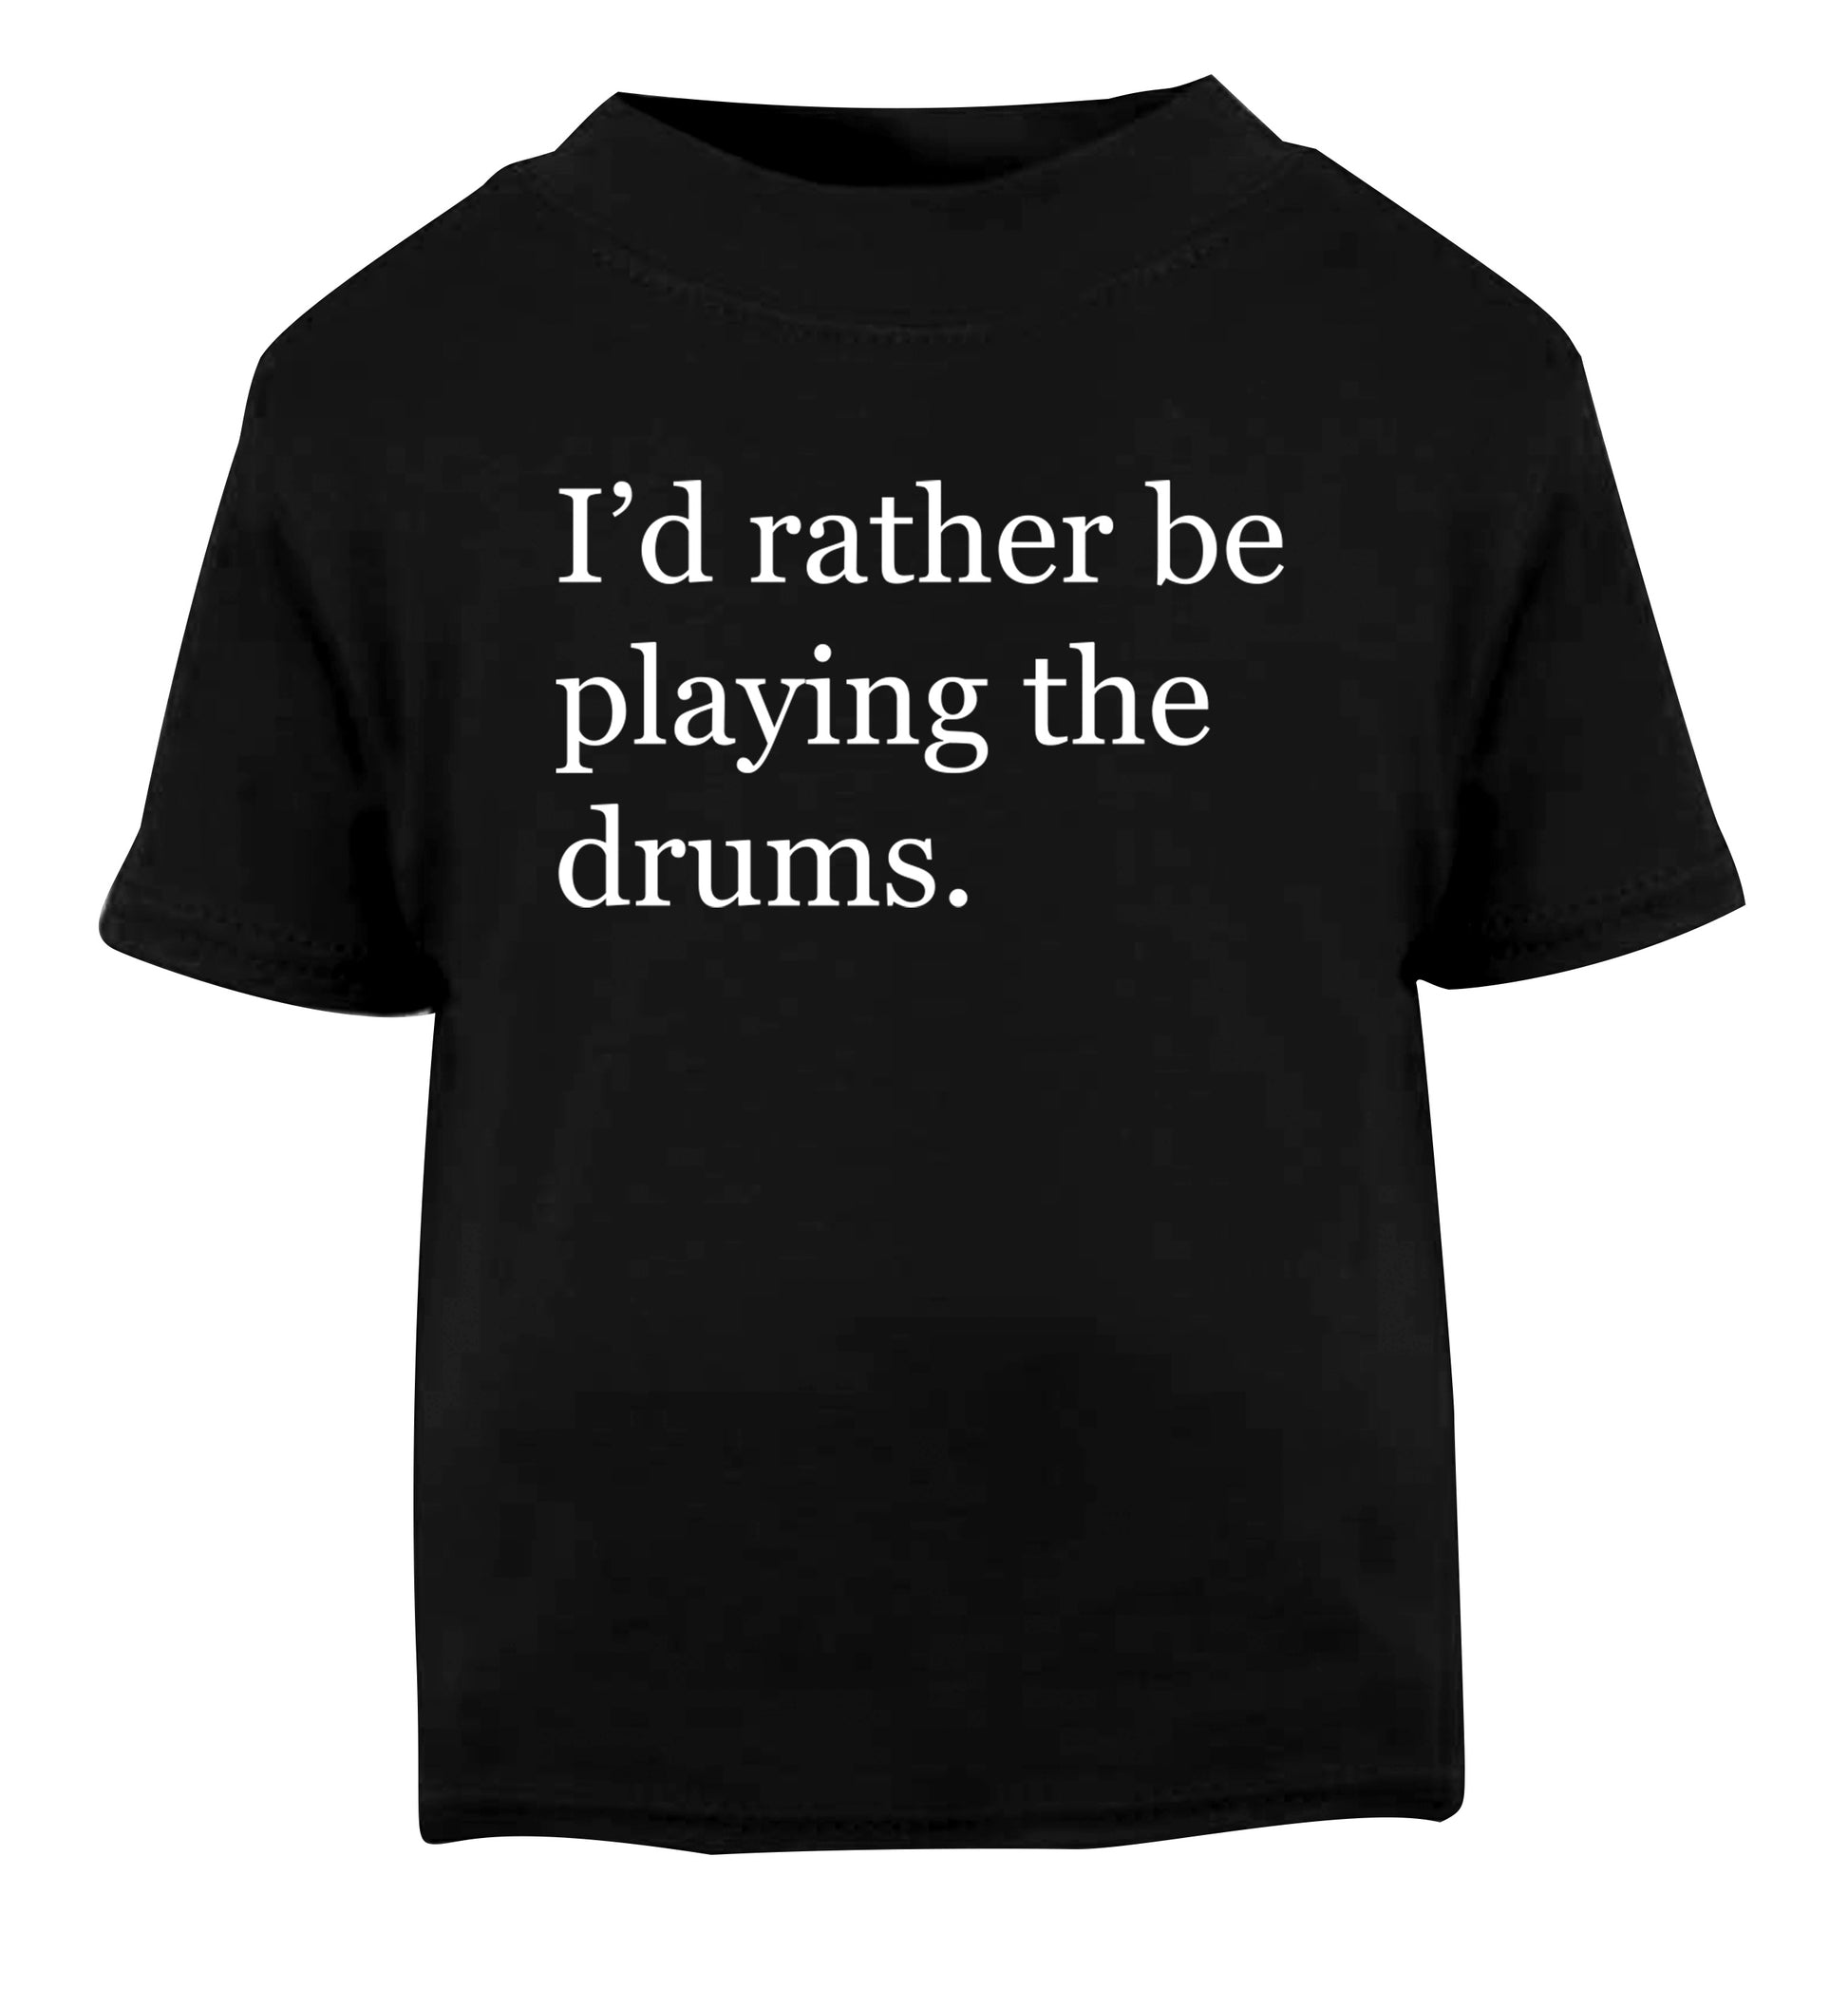 I'd rather be playing the drums Black Baby Toddler Tshirt 2 years